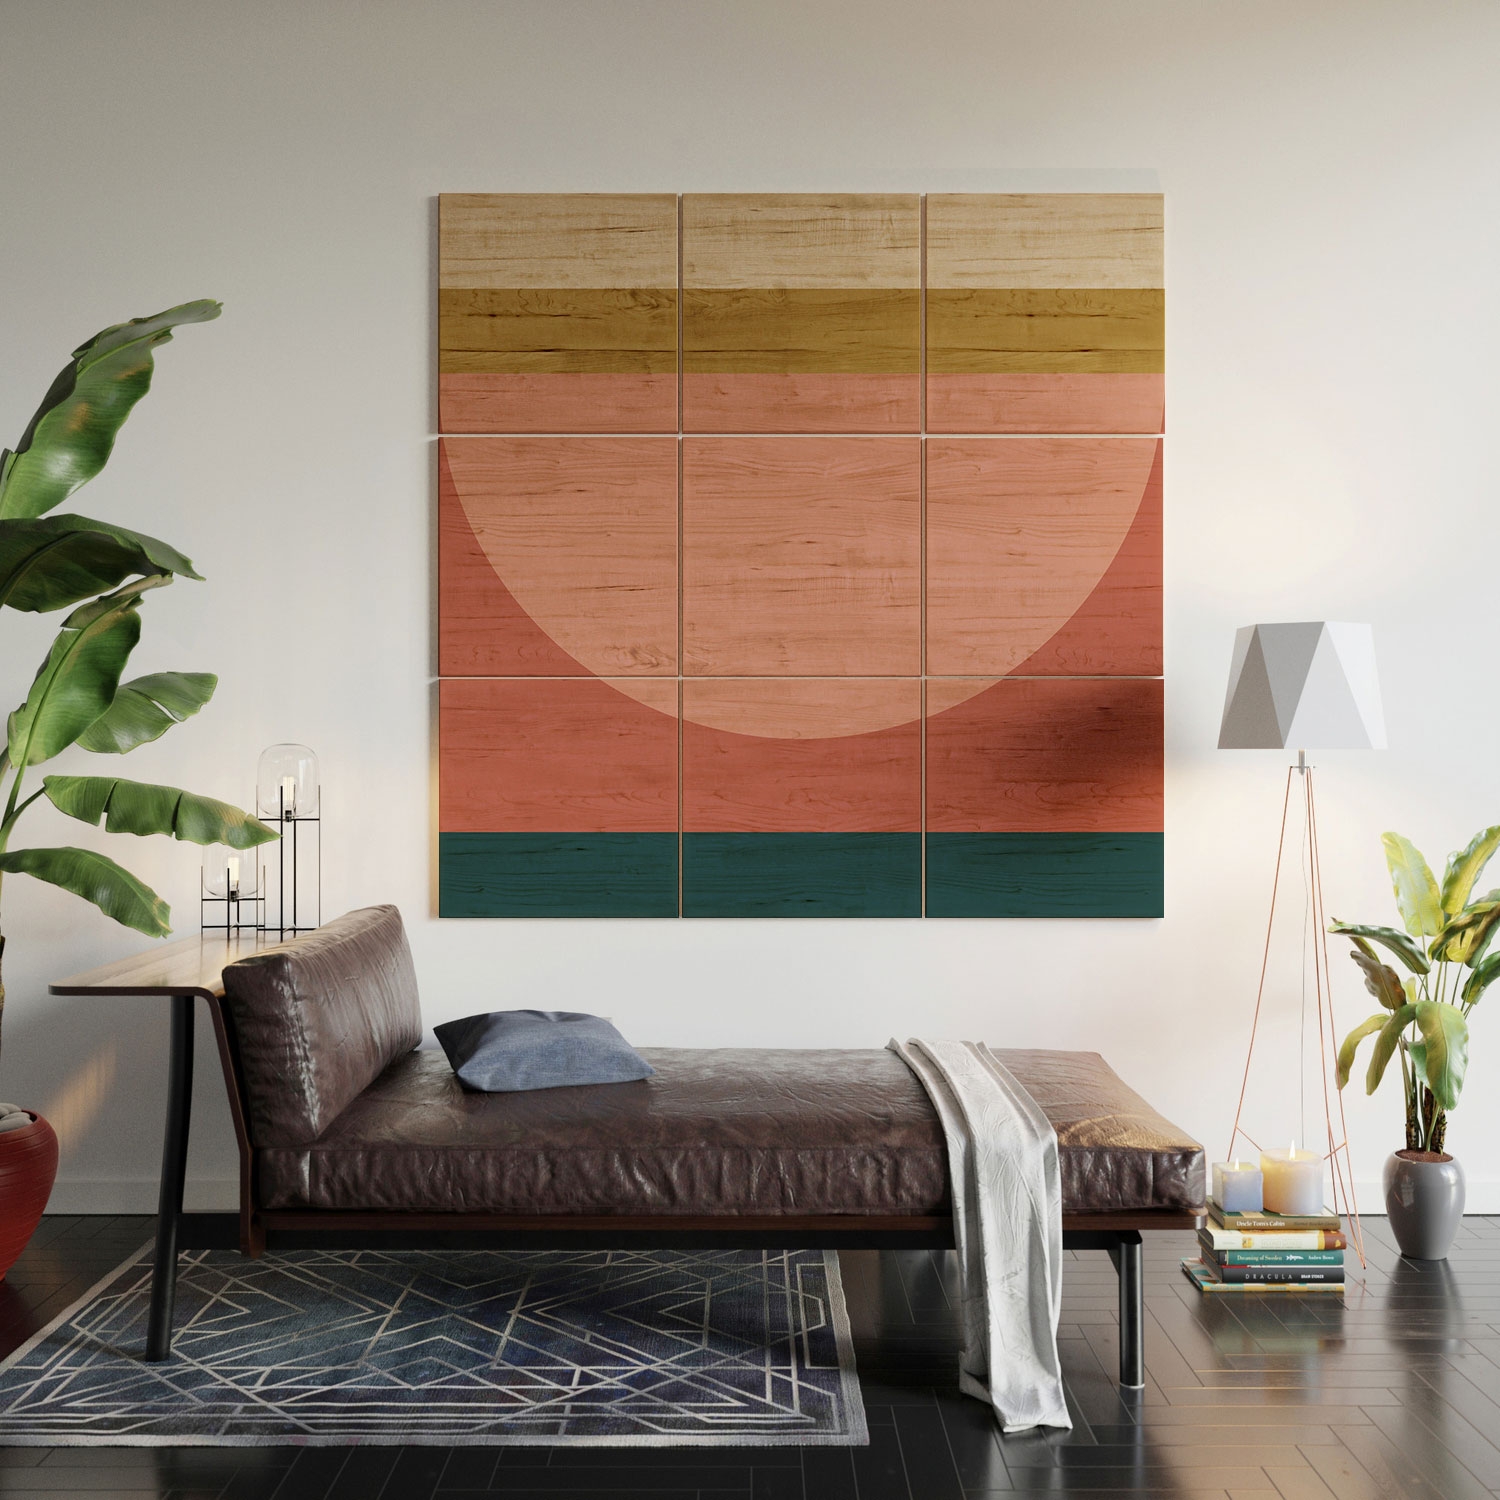 Maximalist Geometric 03 by The Old Art Studio - Wood Wall Mural3' X 3' (Nine 12" Wood Squares) - Image 2